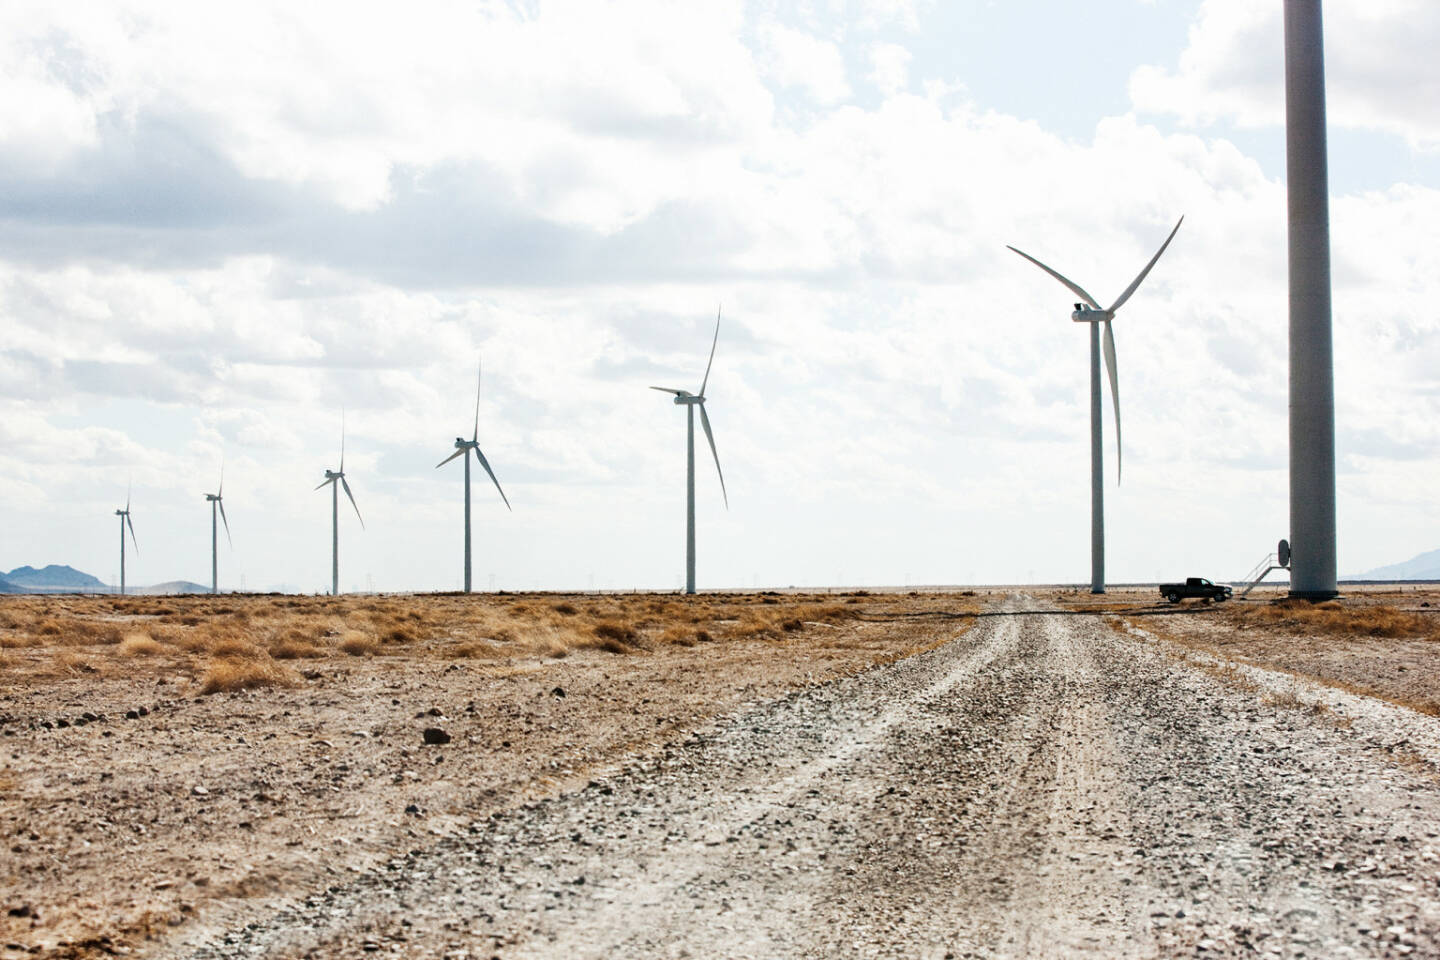 Installed turbines; New Mexico, USA, Vestas Wind Systems AS

